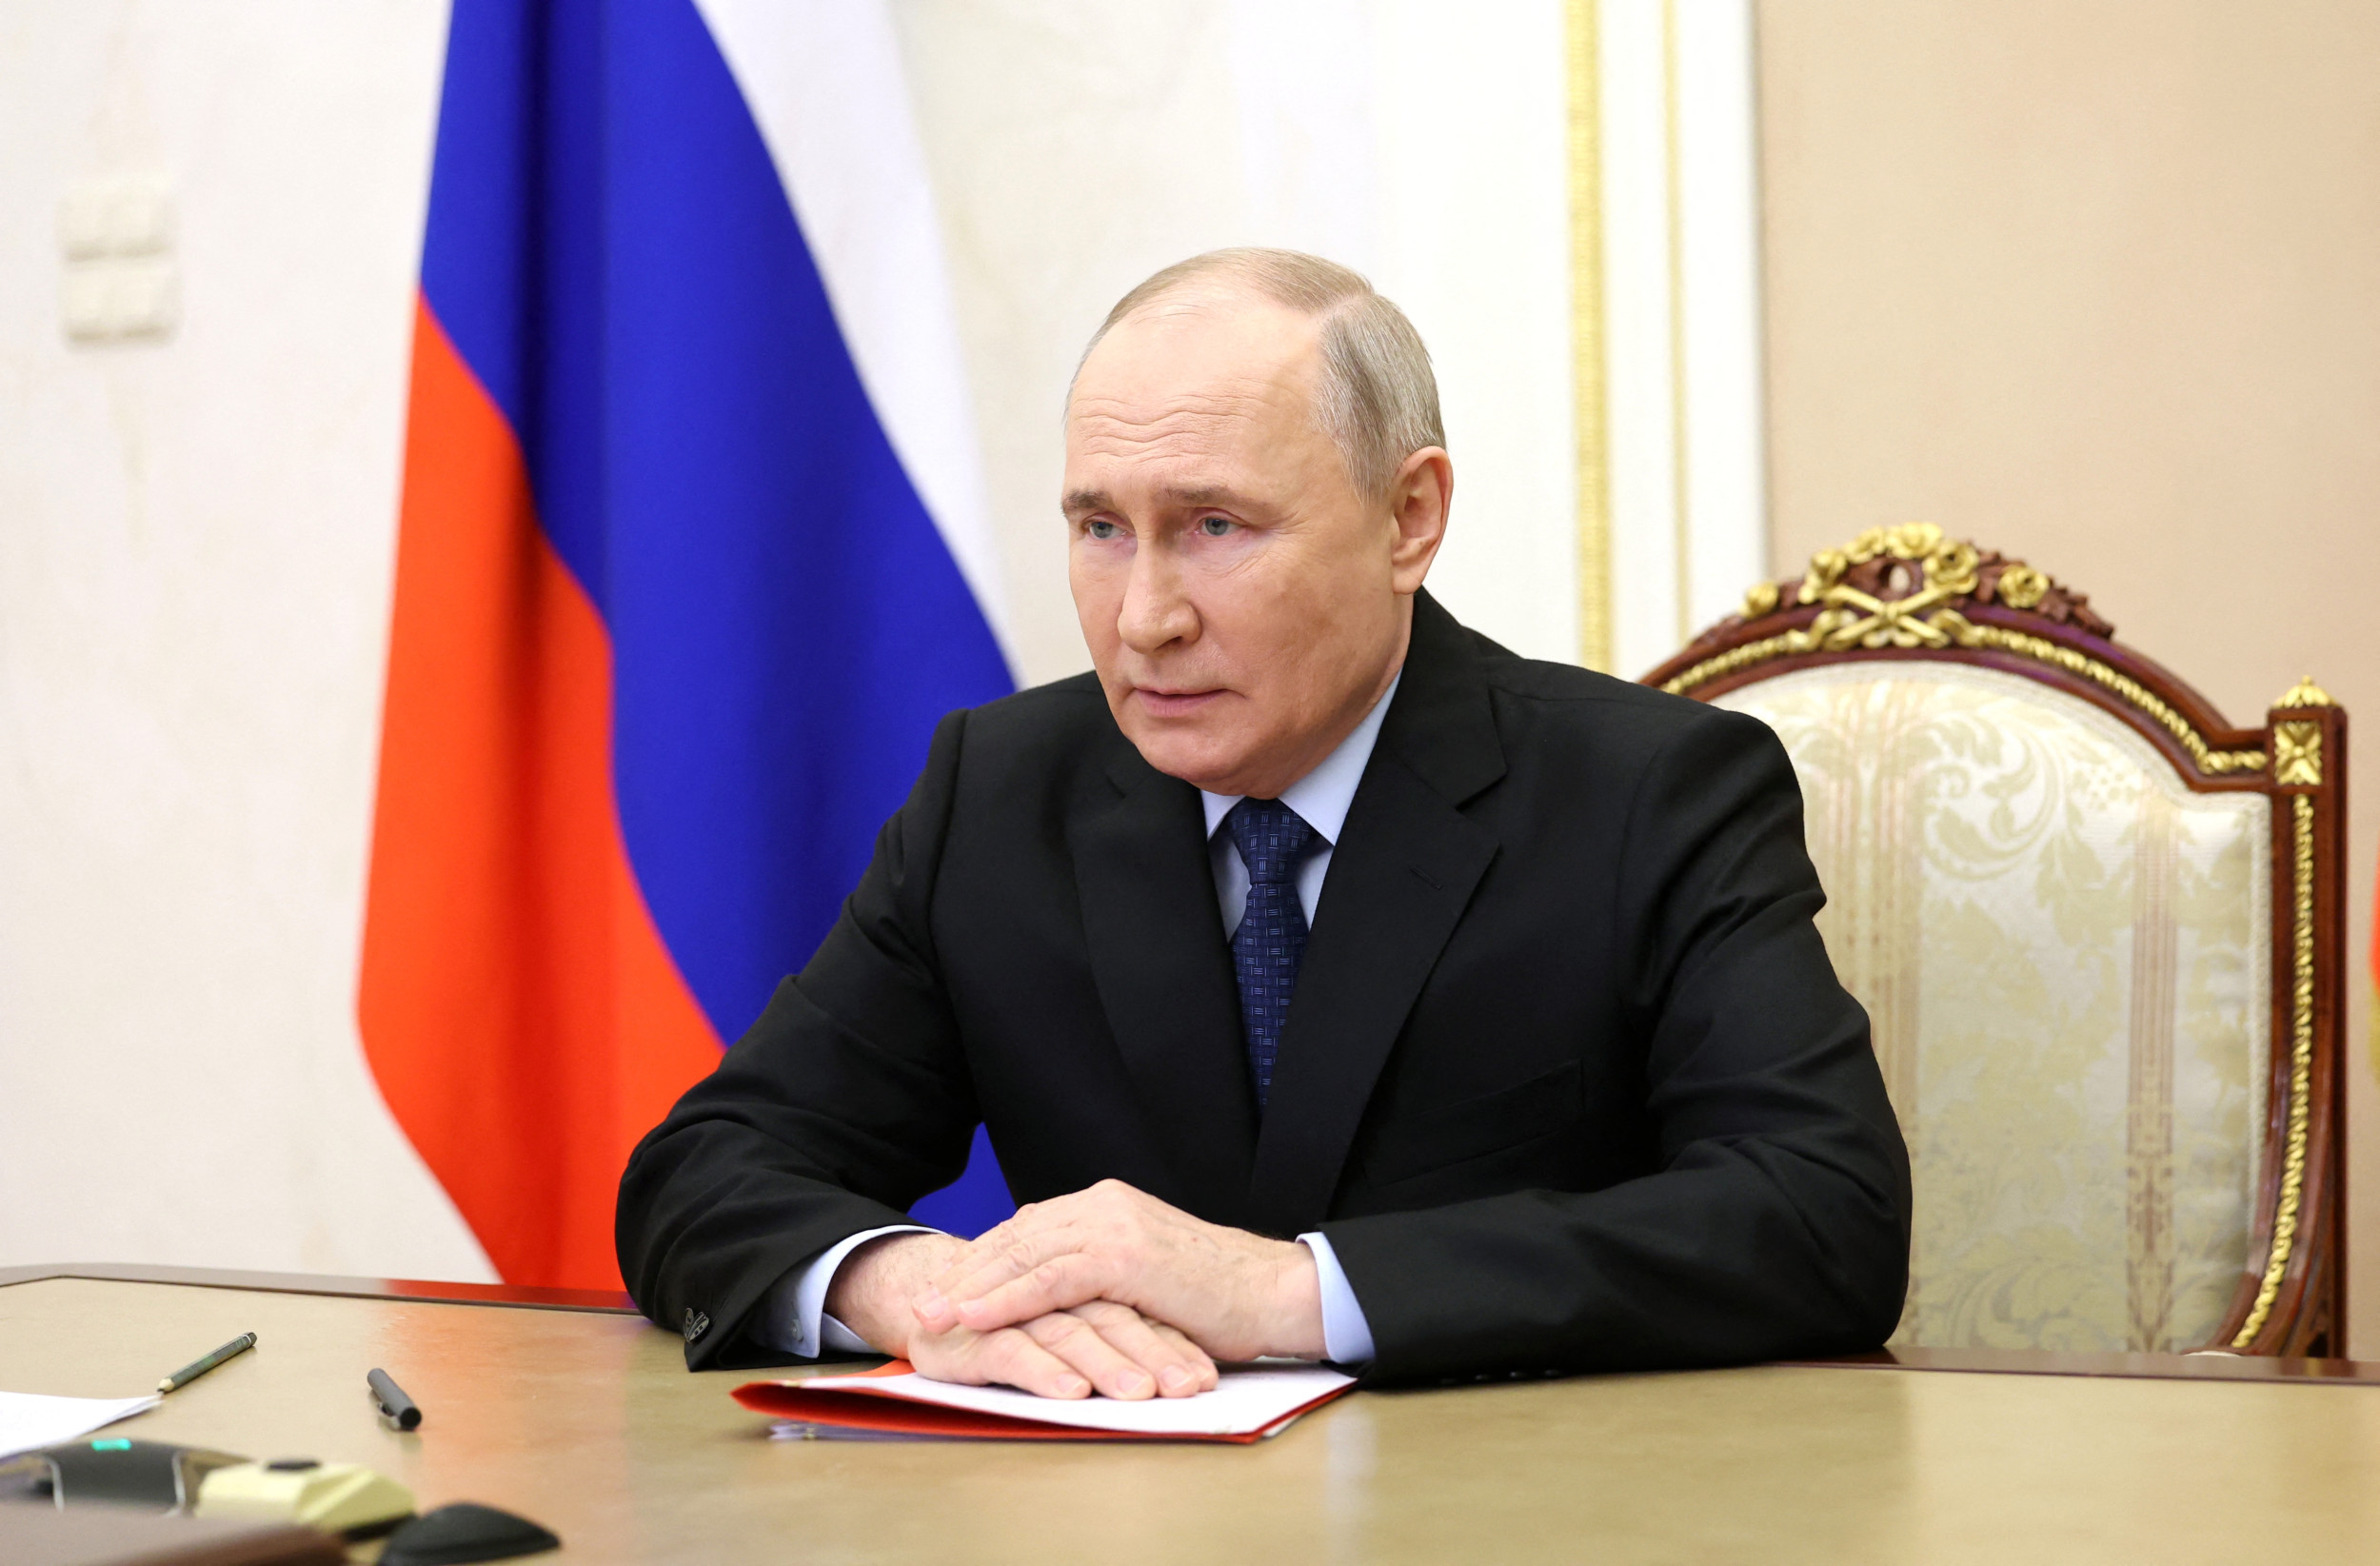 vladimir putin is writing checks his government just can't cash